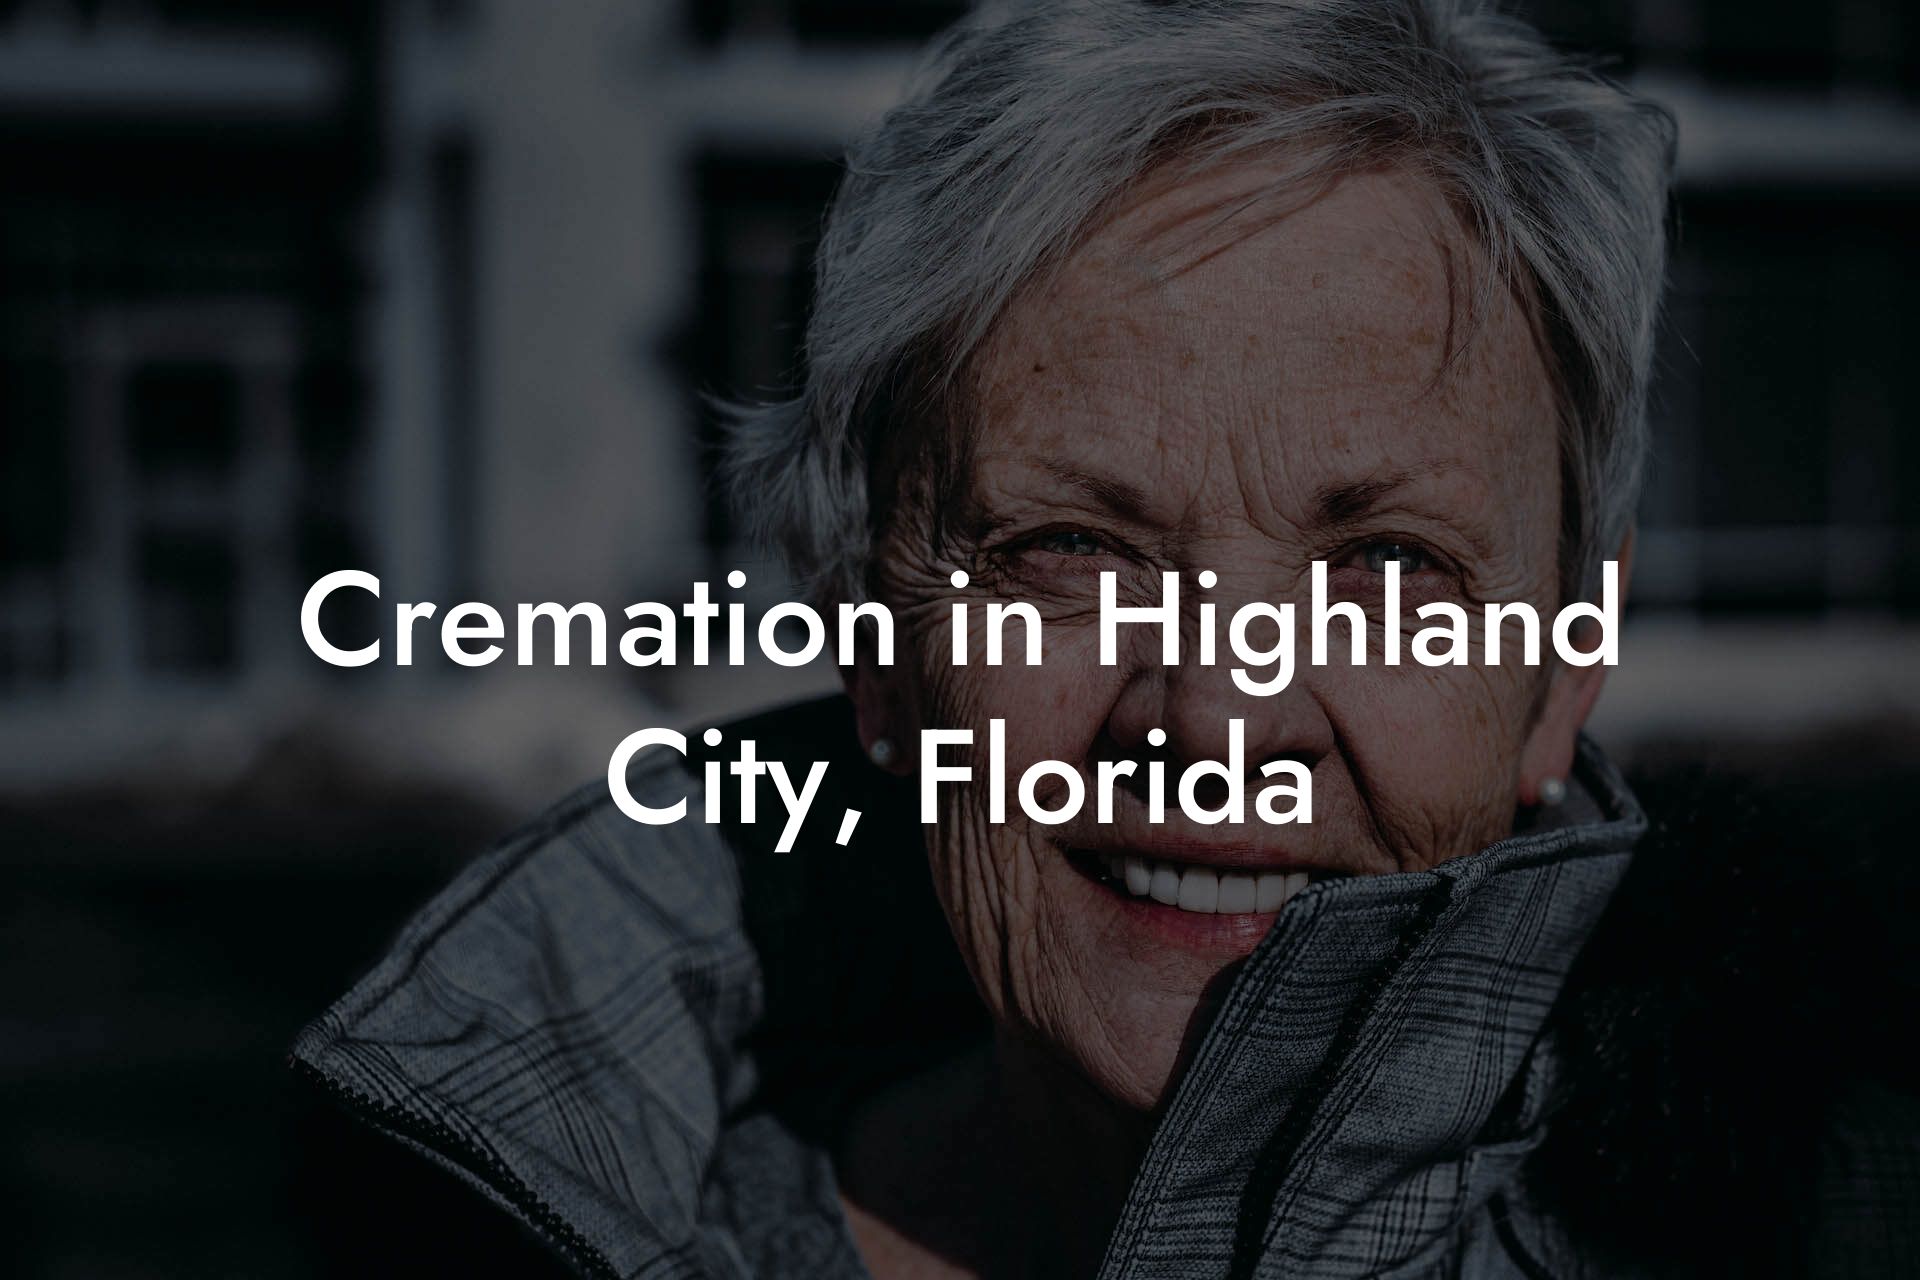 Cremation in Highland City, Florida